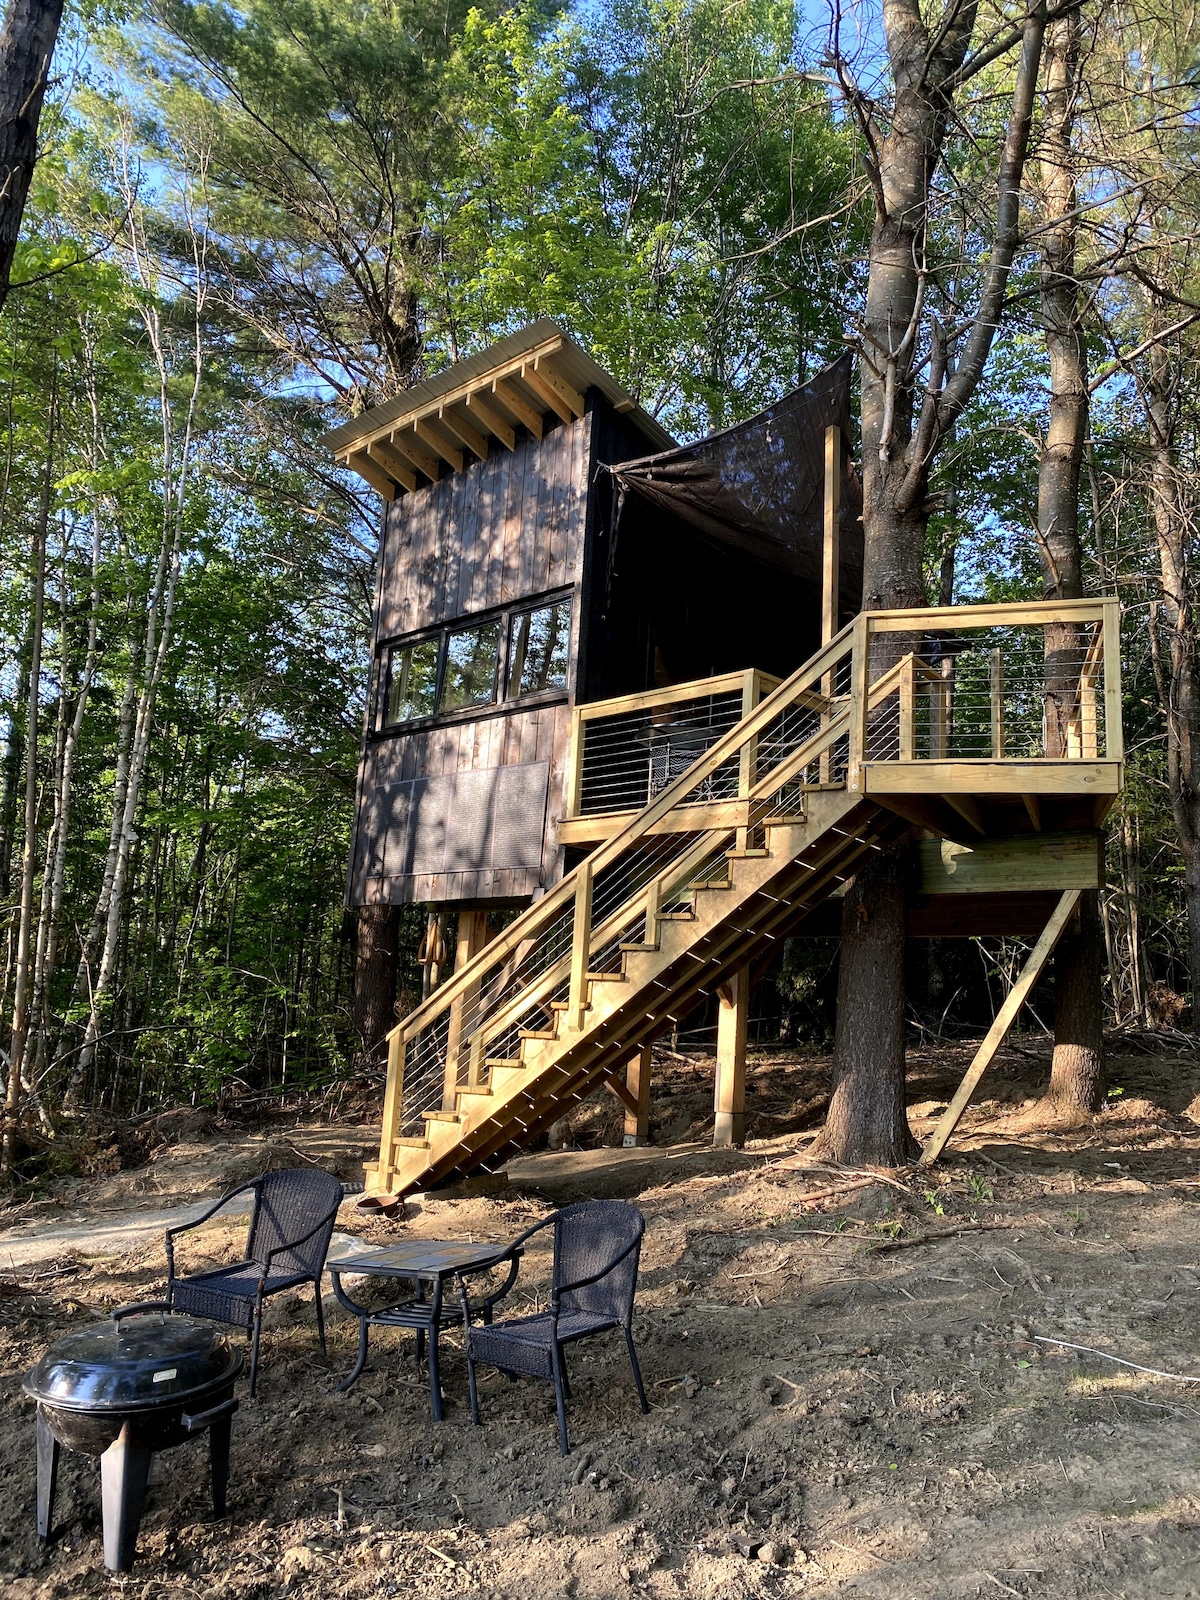 The Lake Willoughy Treehouse